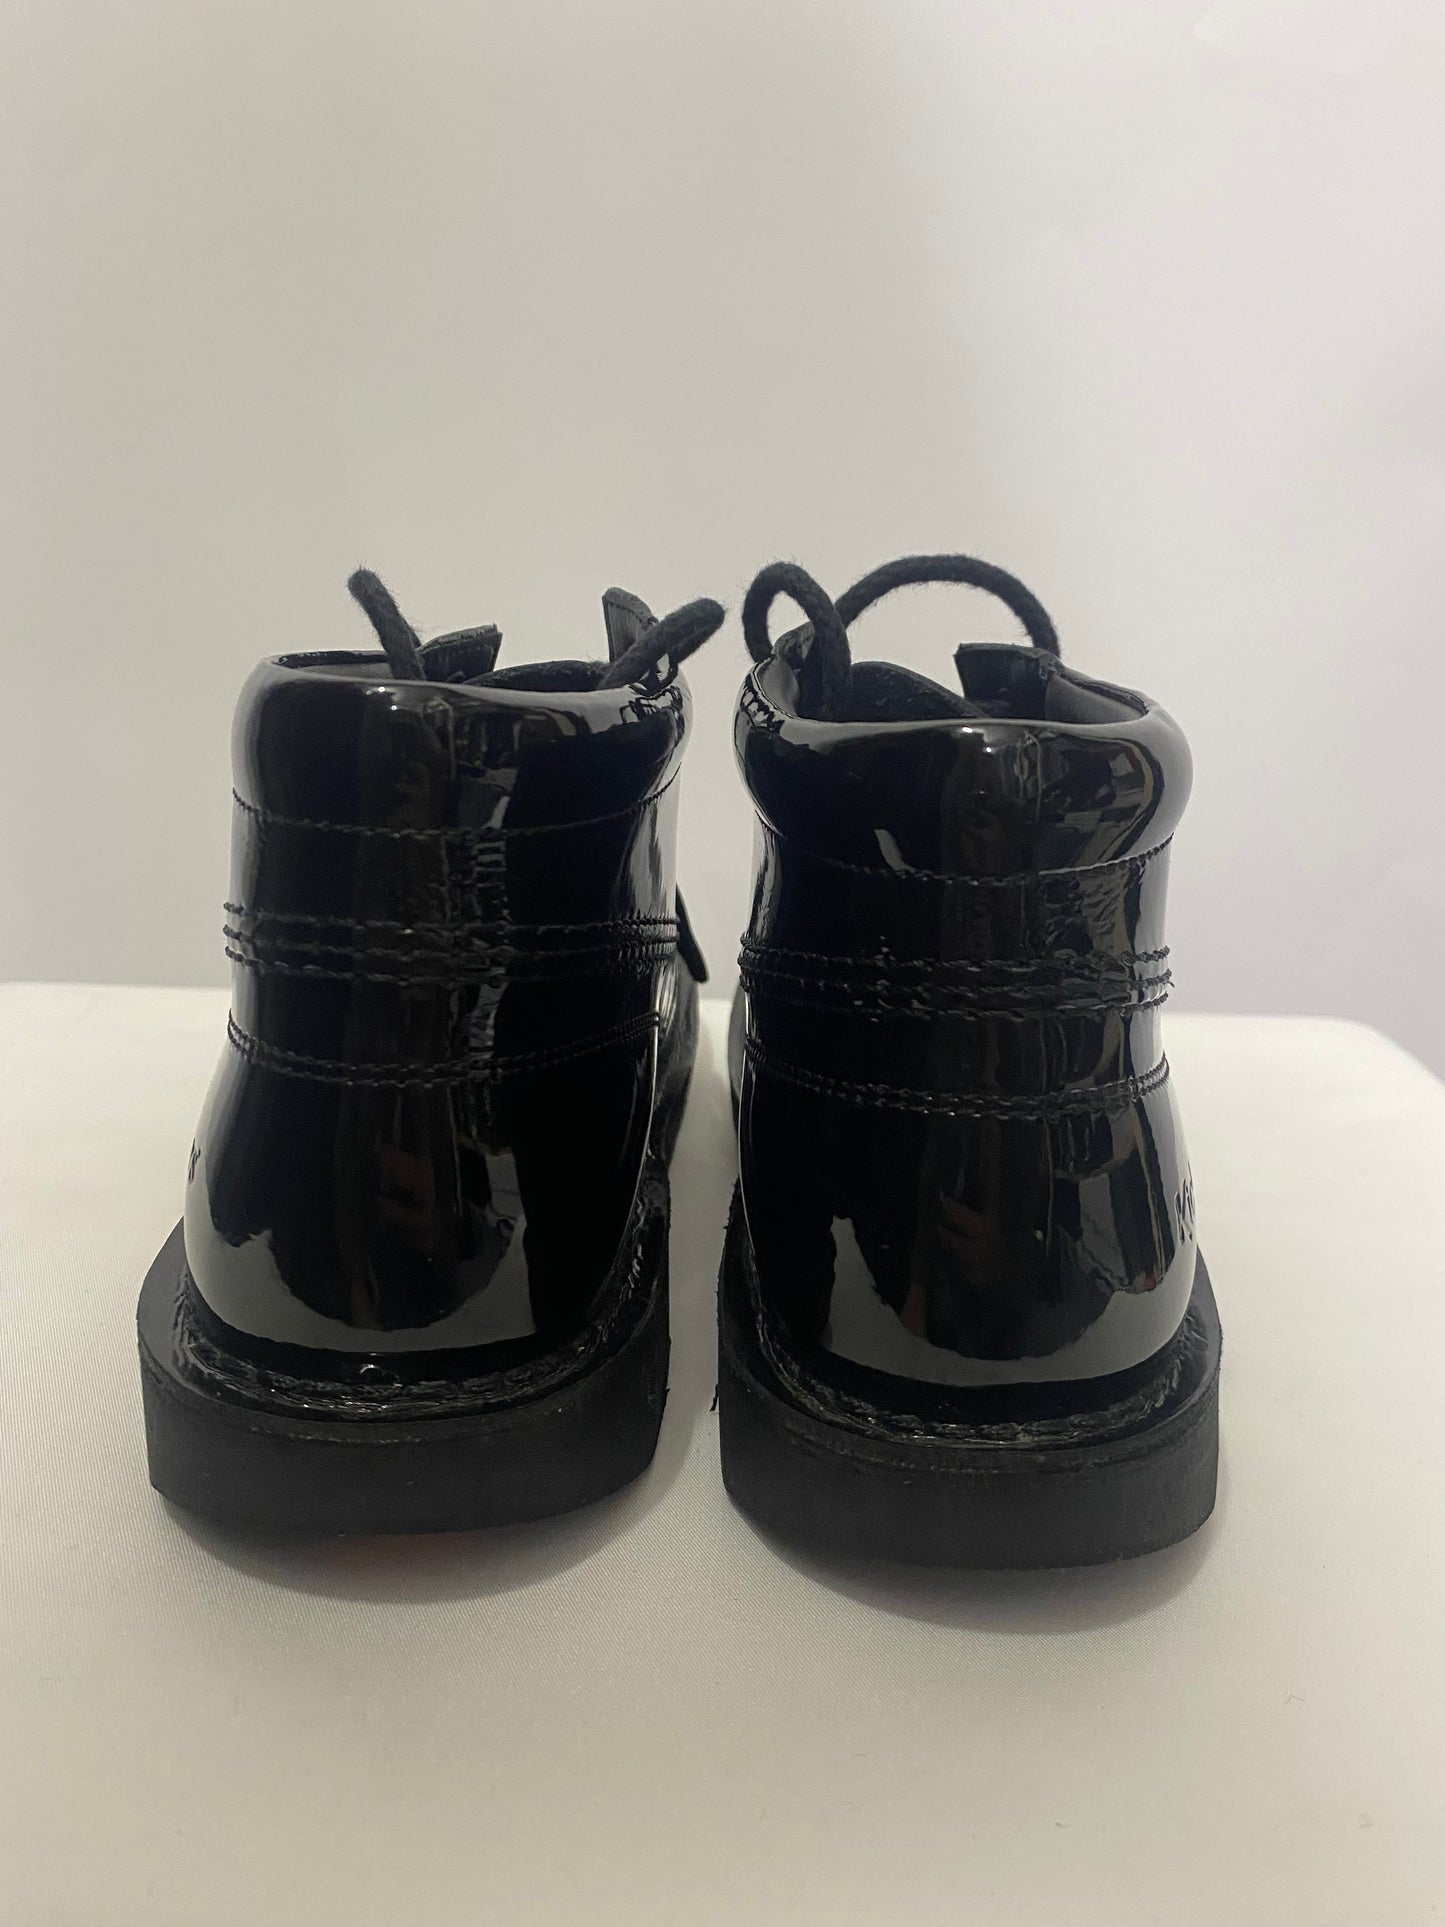 Kickers Youth Unisex Black Patent Boots 3